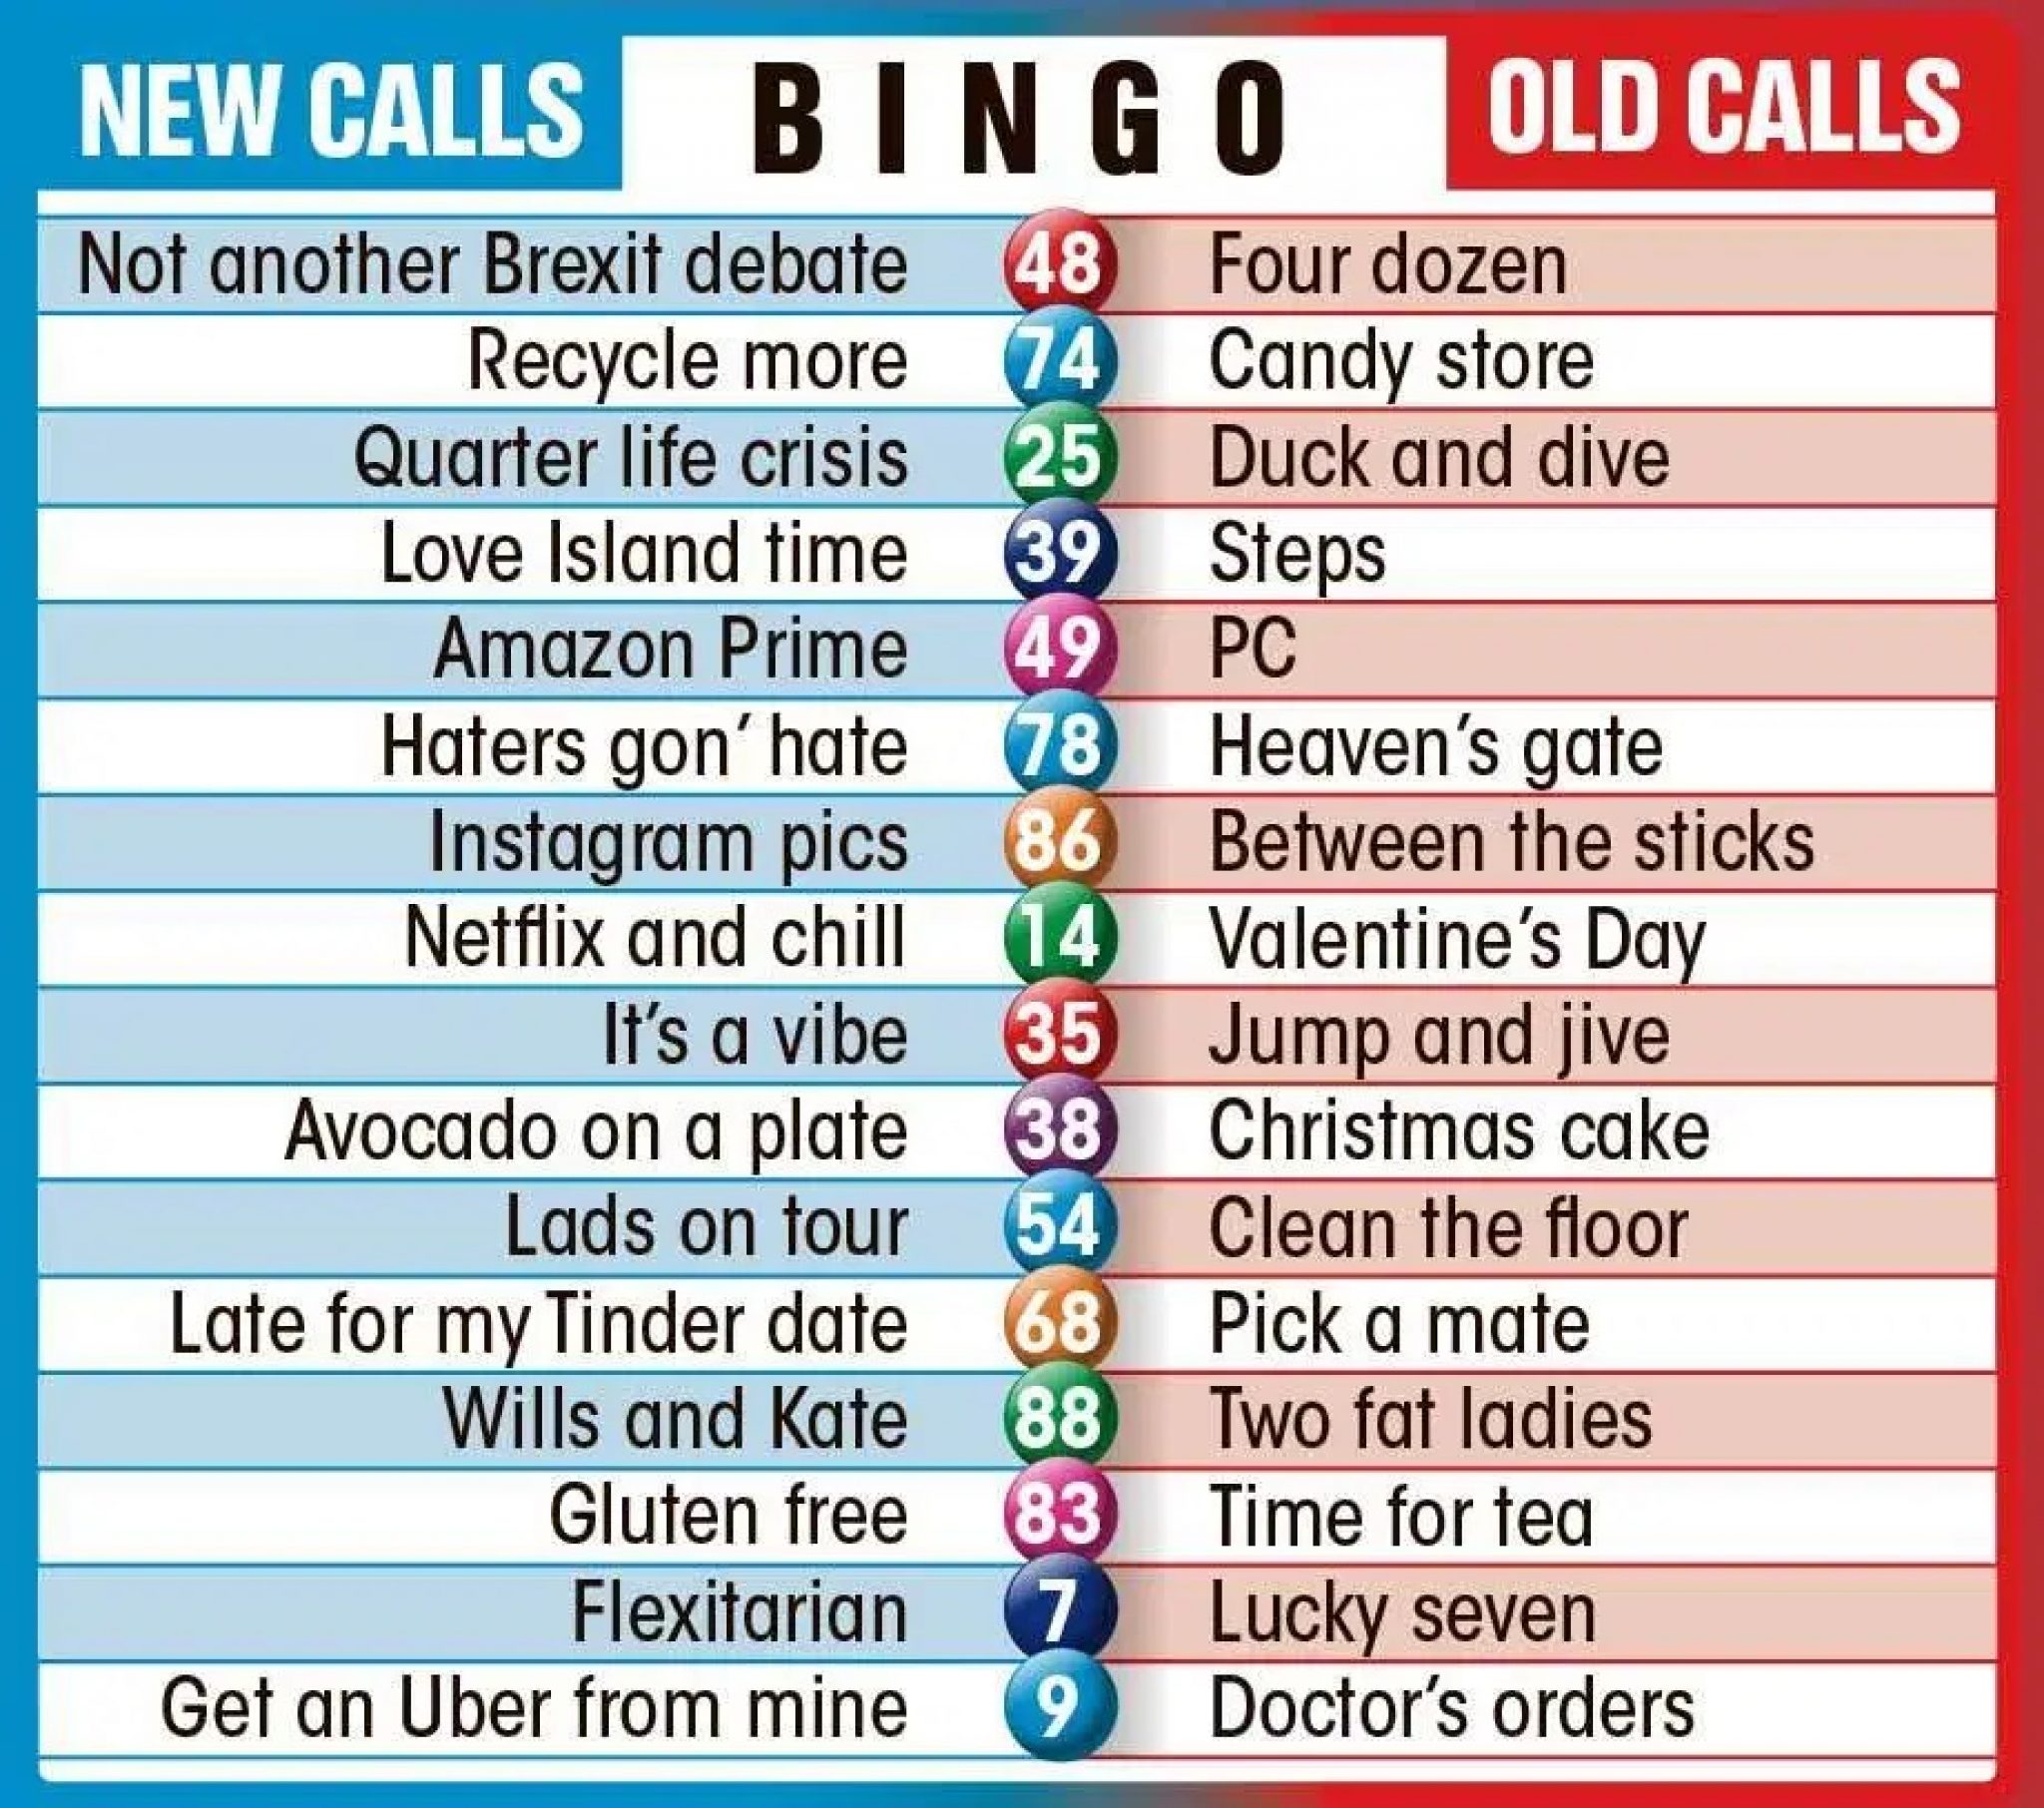 Bingo Calls For All Numbers